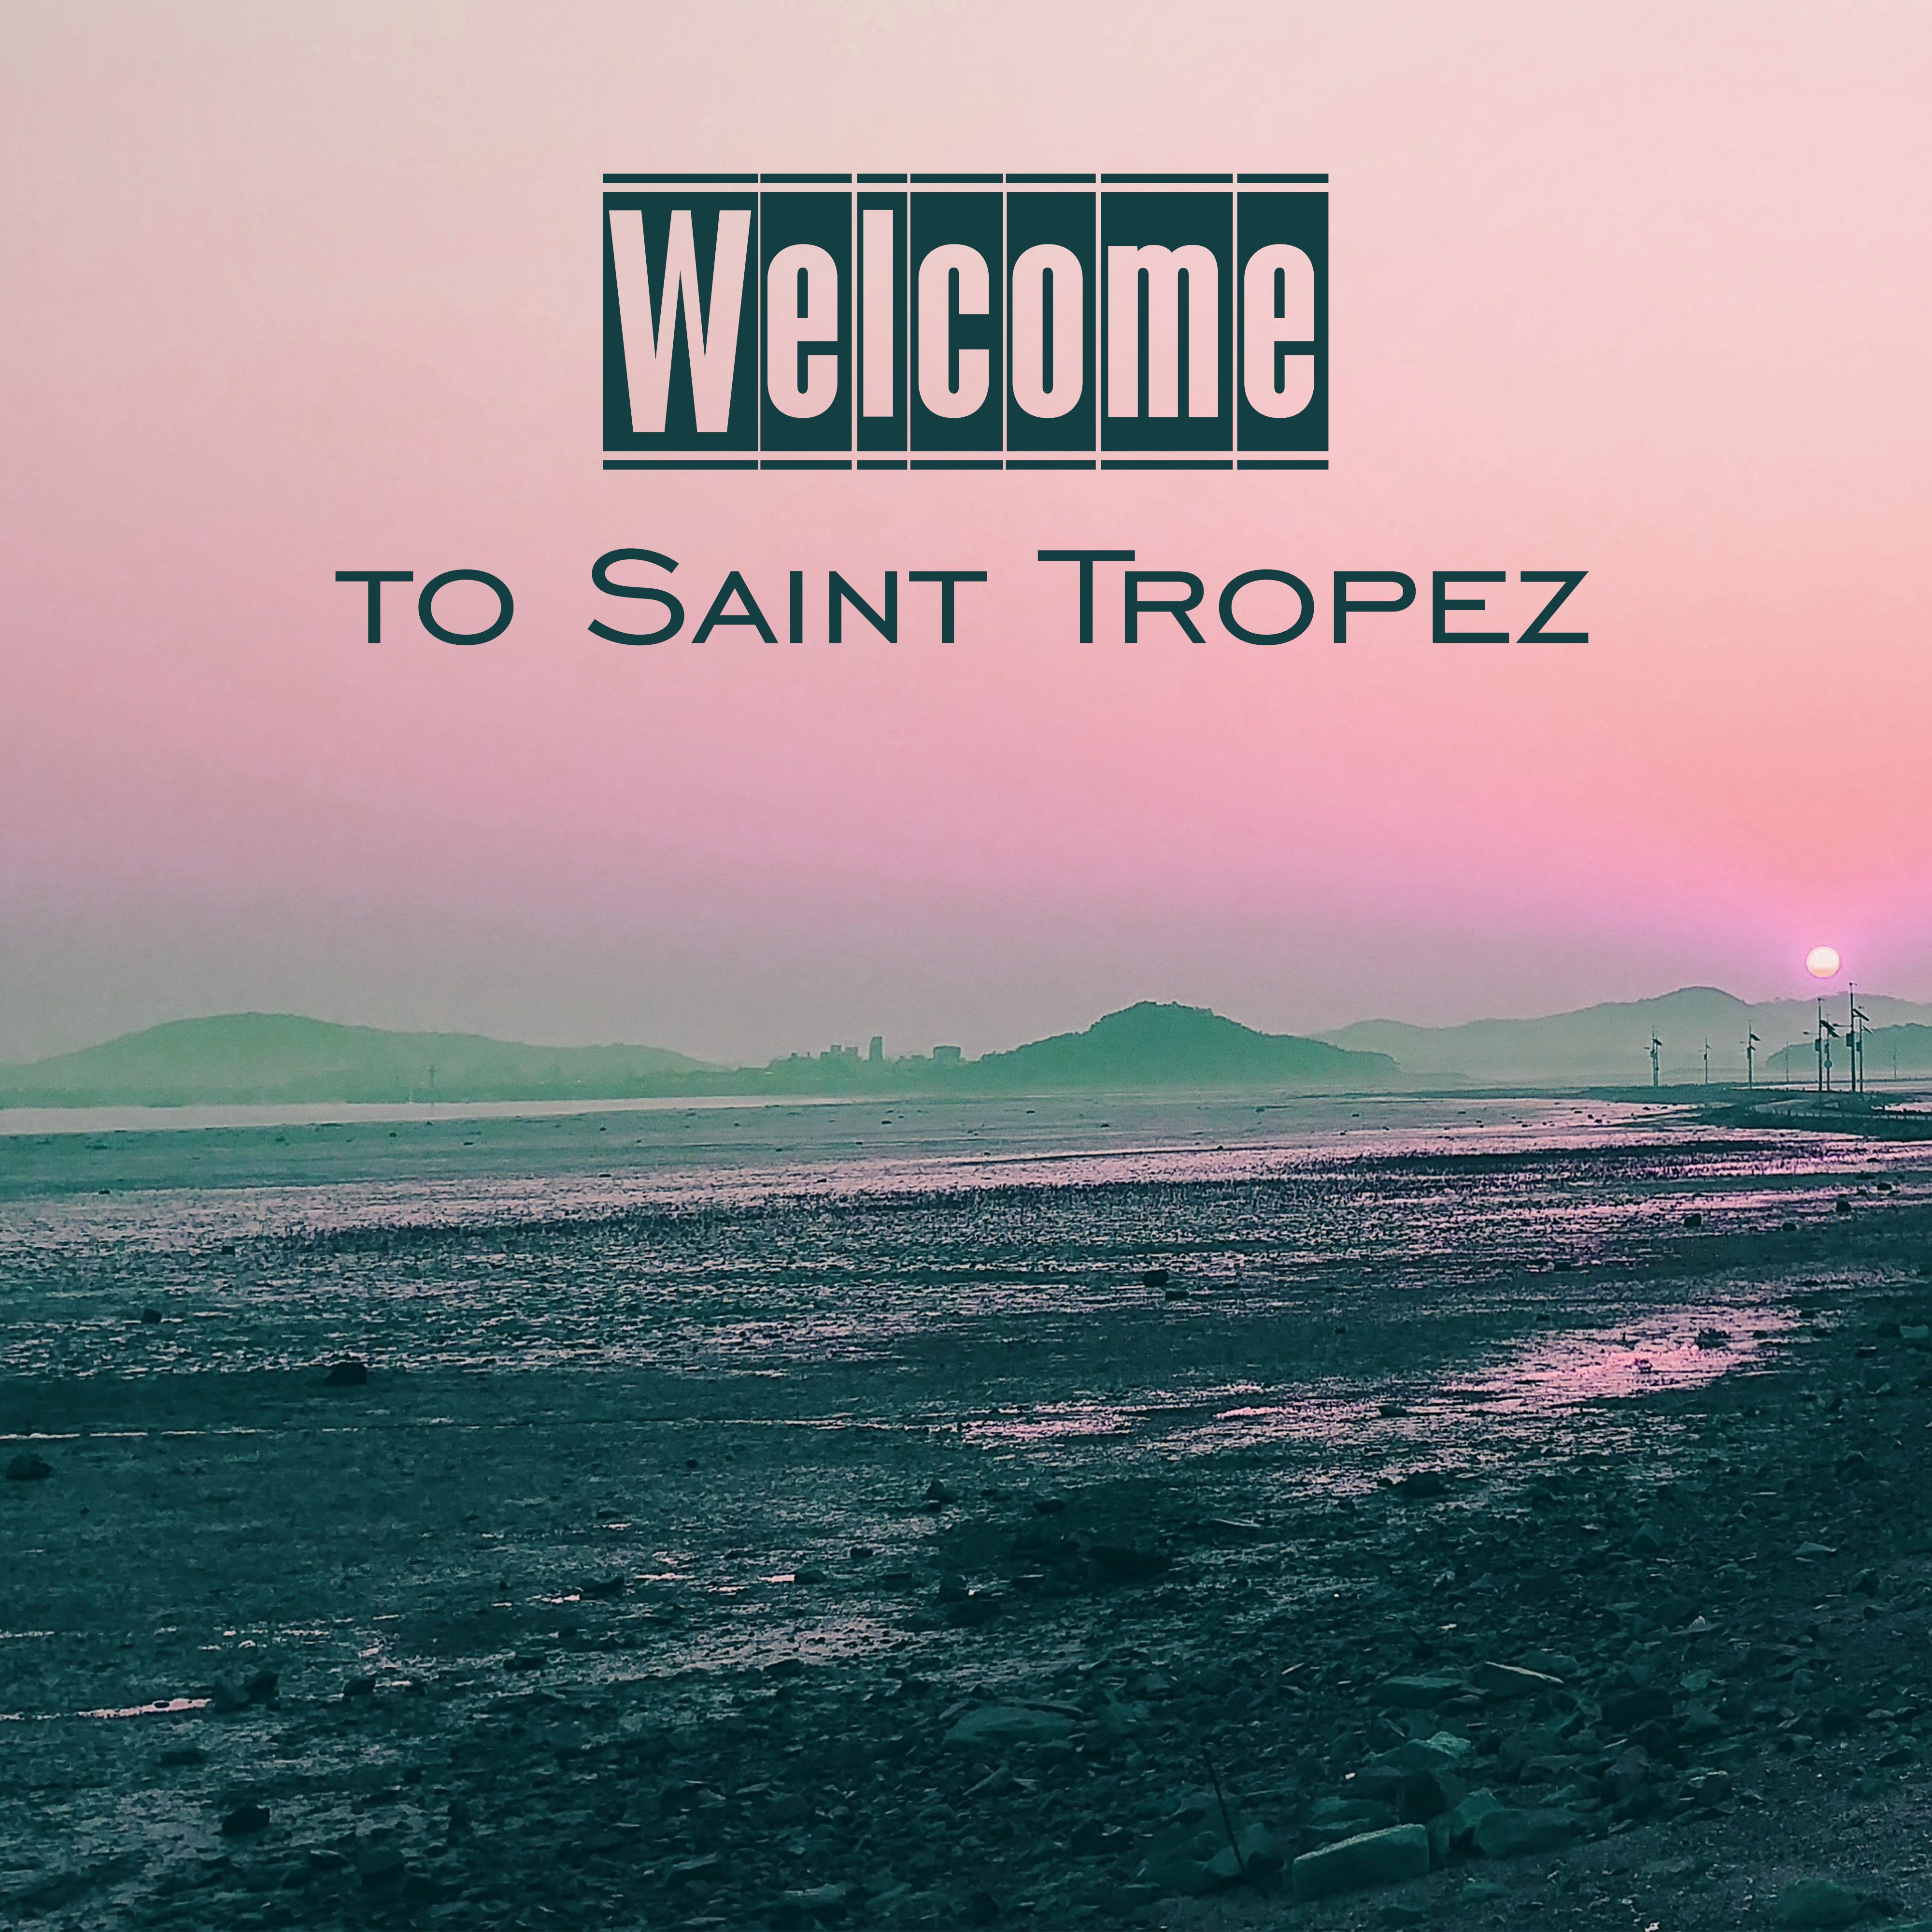 Welcome to Saint Tropez – Beach Party, **** Vibes, Bar Chill Out, Dance Party, Relax, Summer Chill, Party Night, Summer Hits